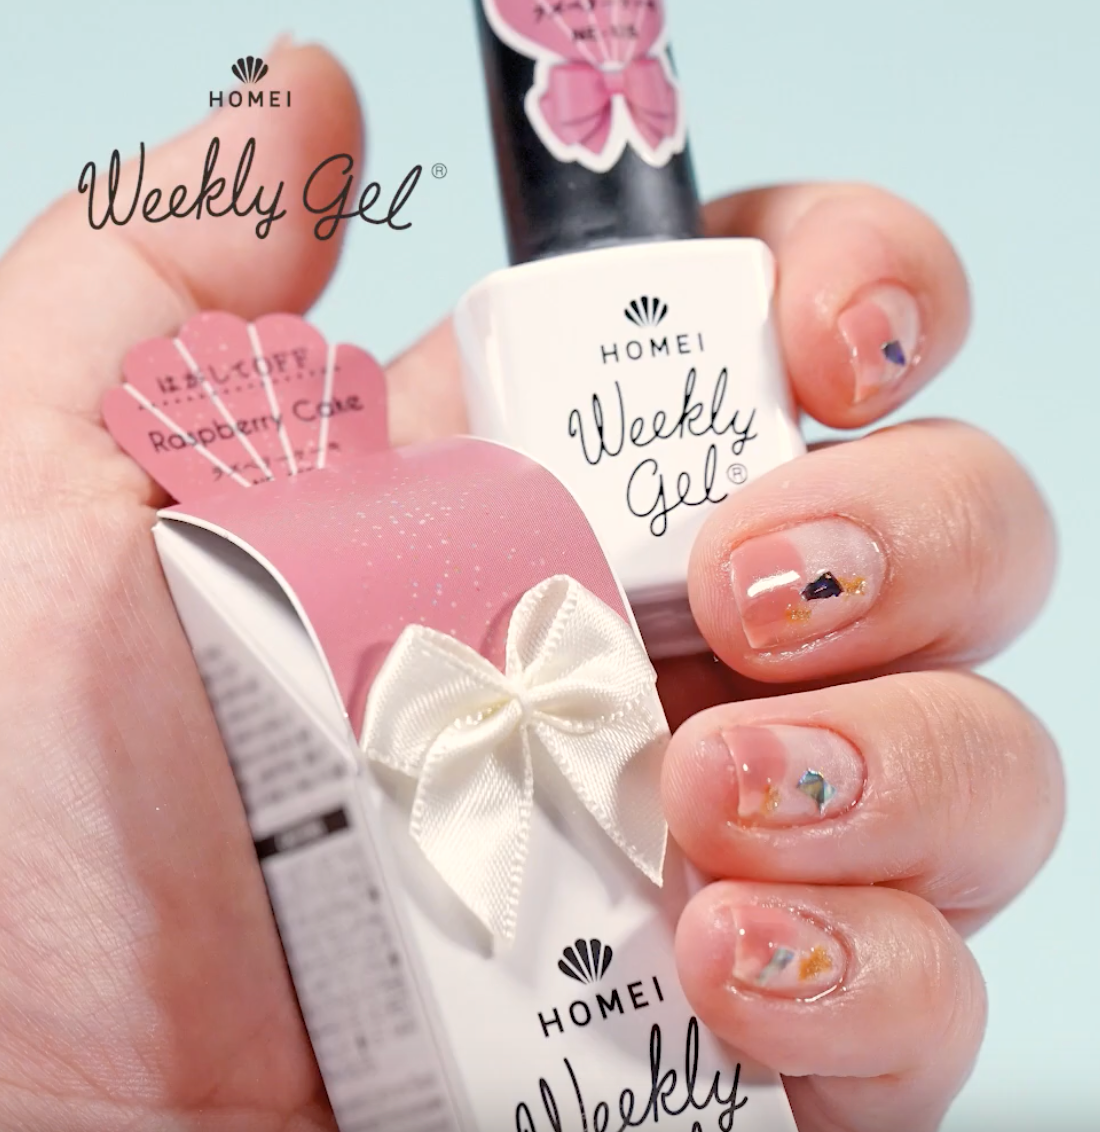 How to video for basic self gel nail, using HOMEI Weekly Gel